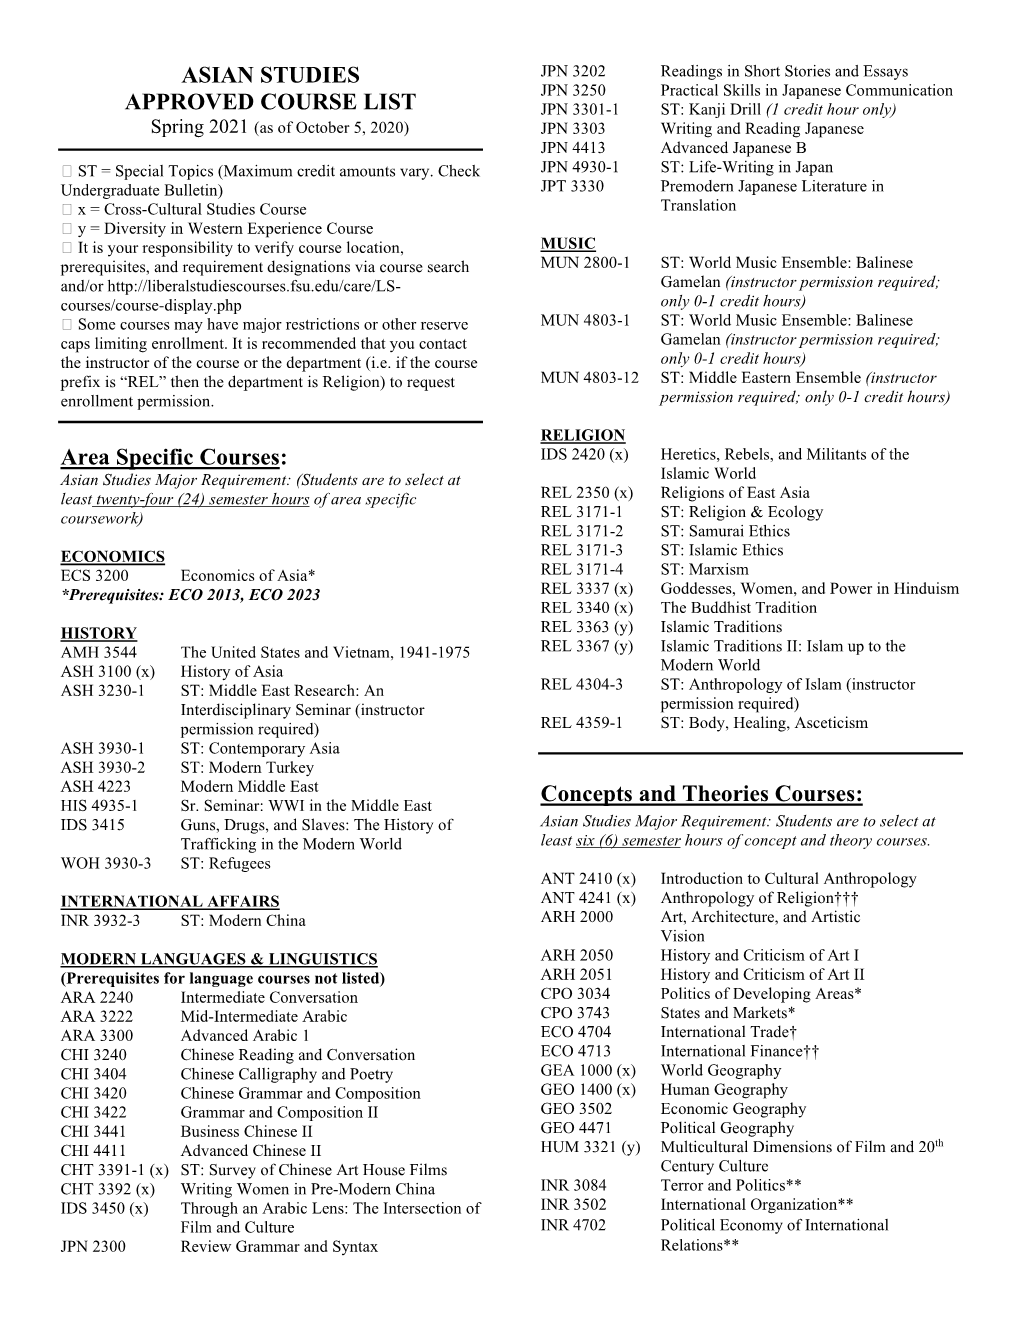 Asian Studies Approved Course List